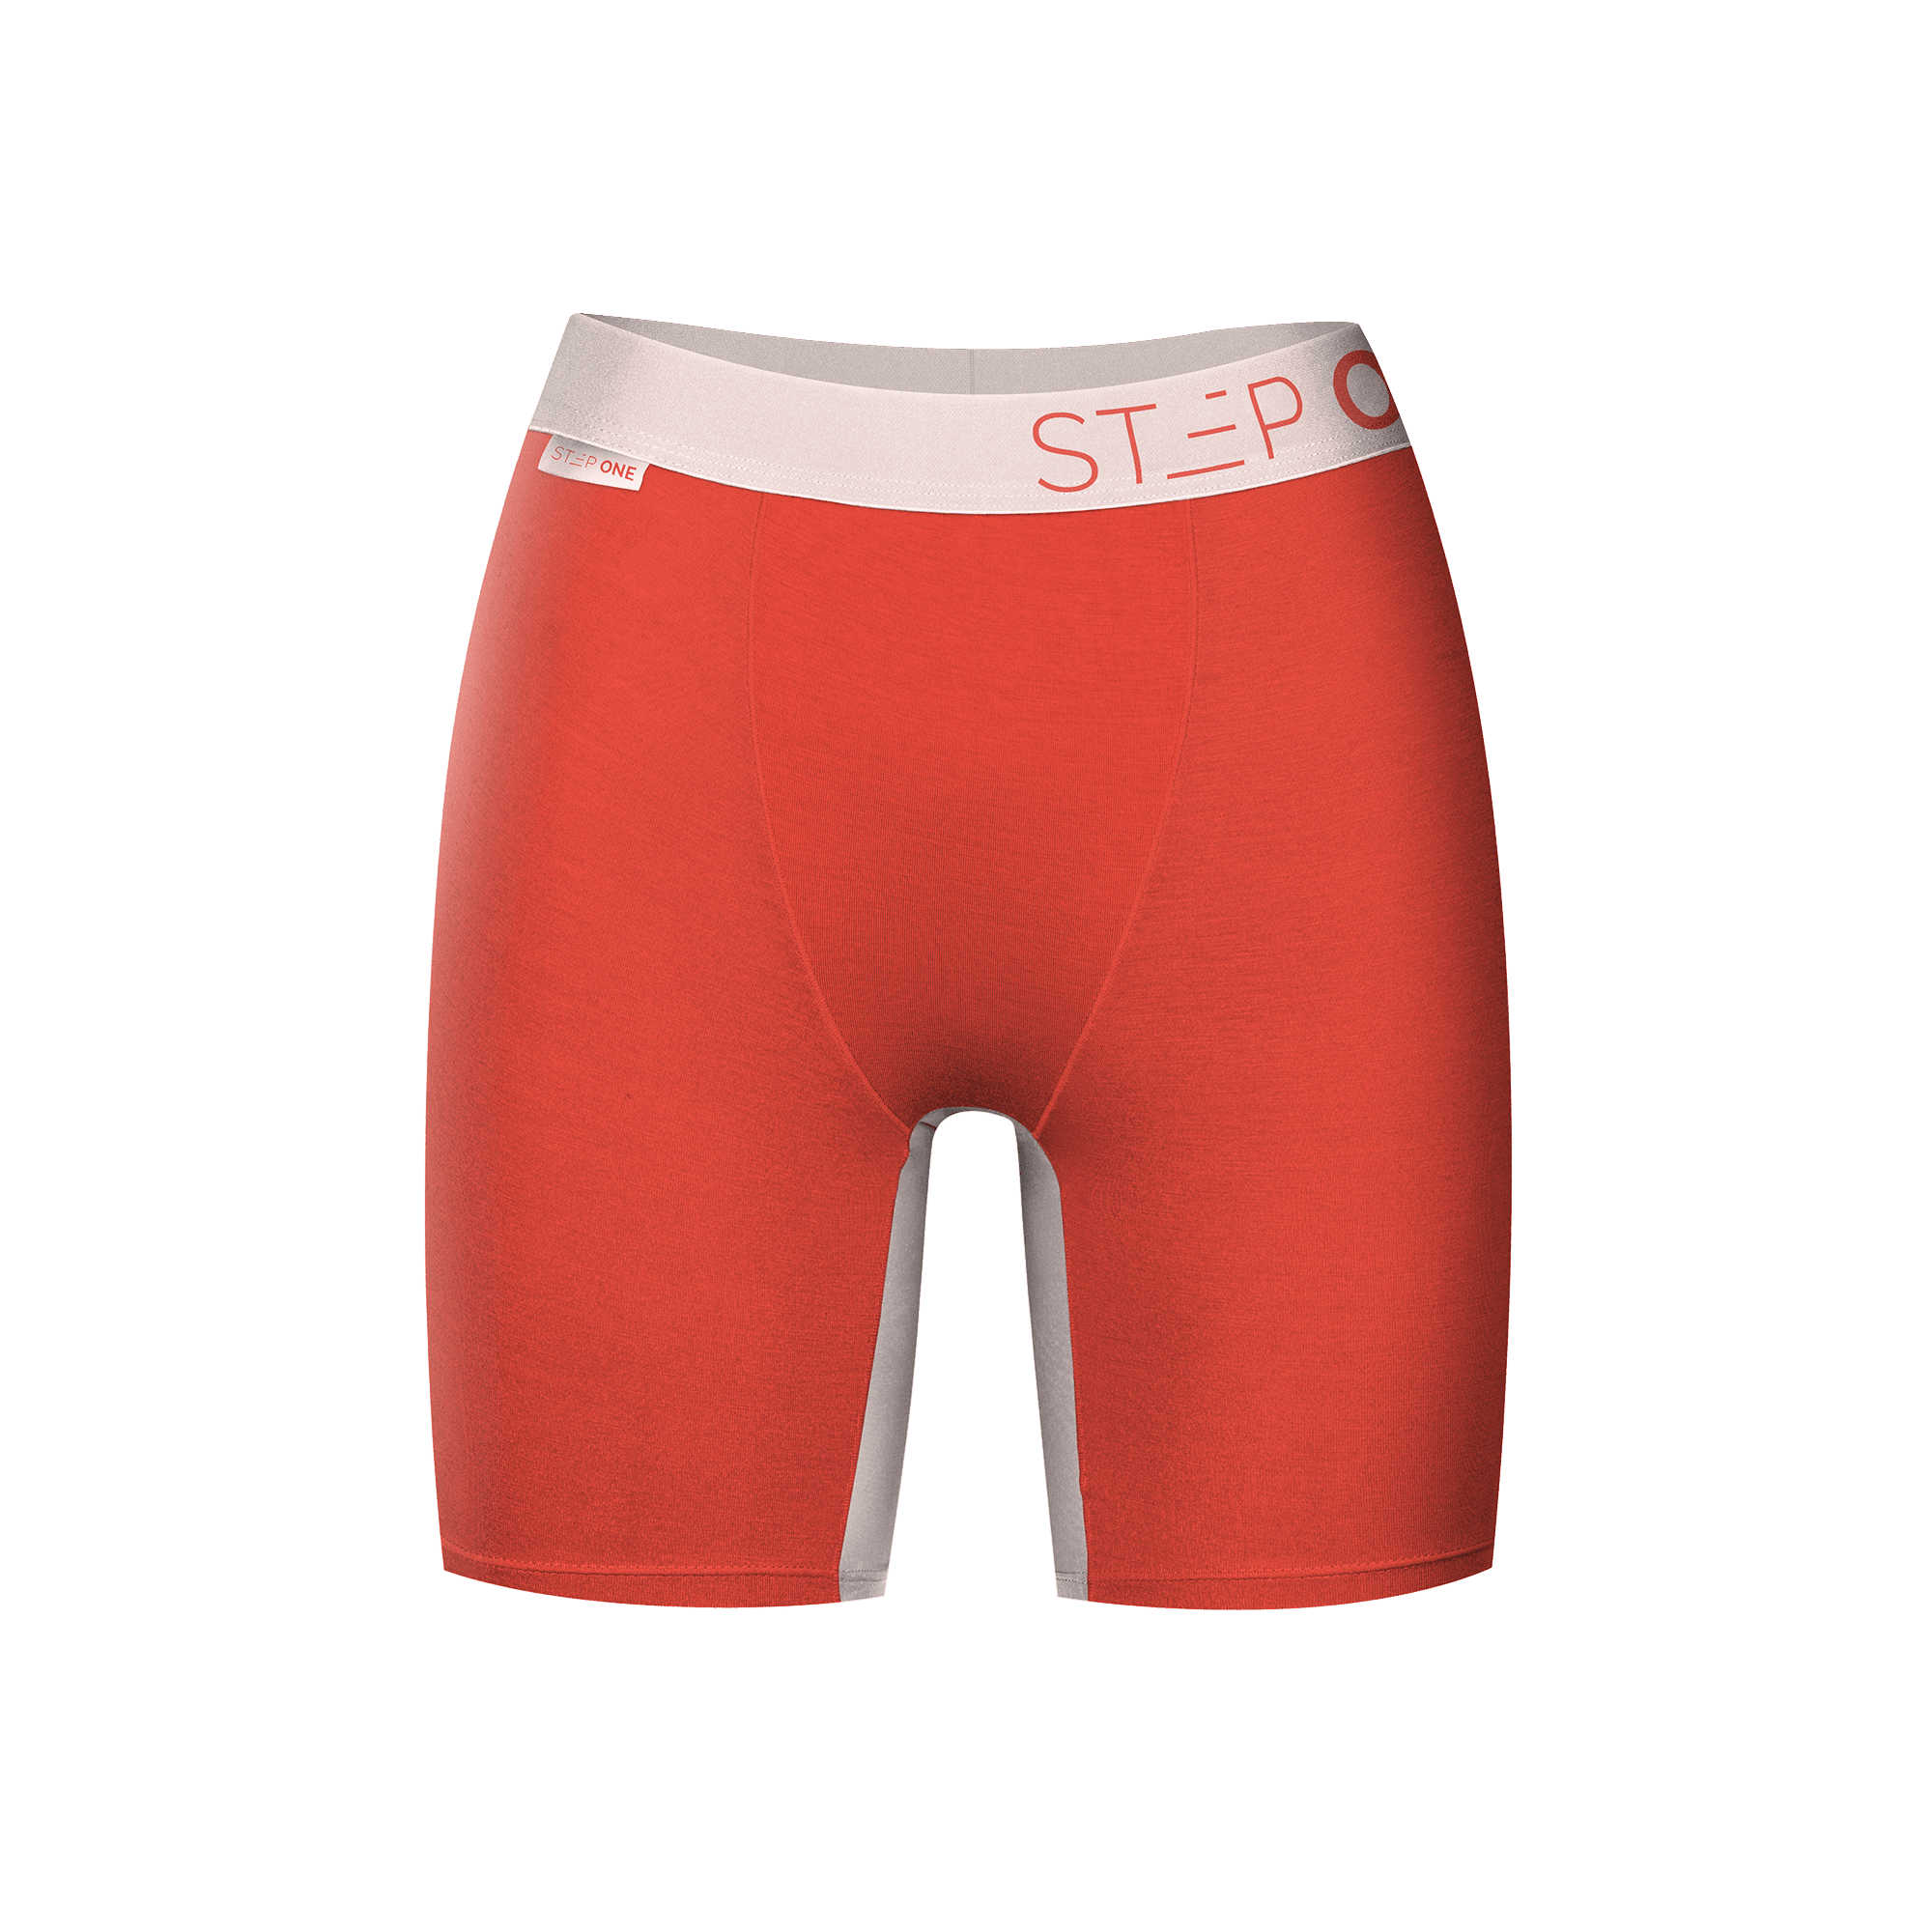 Women's Boxer - England product